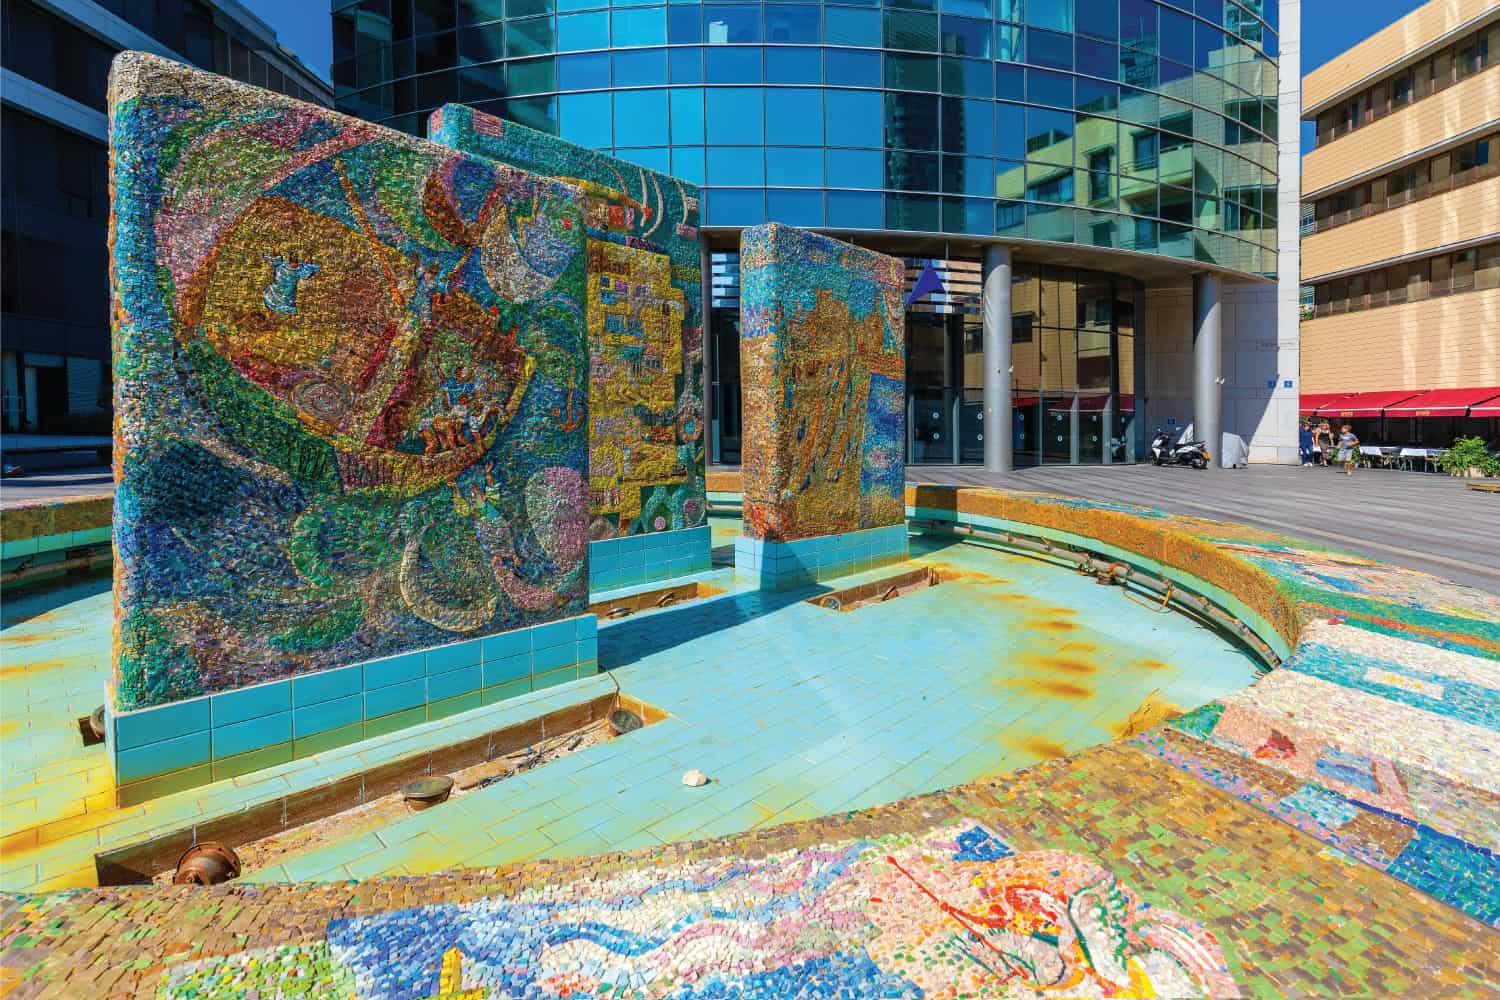 Mosaic wall outdoor design outside a building